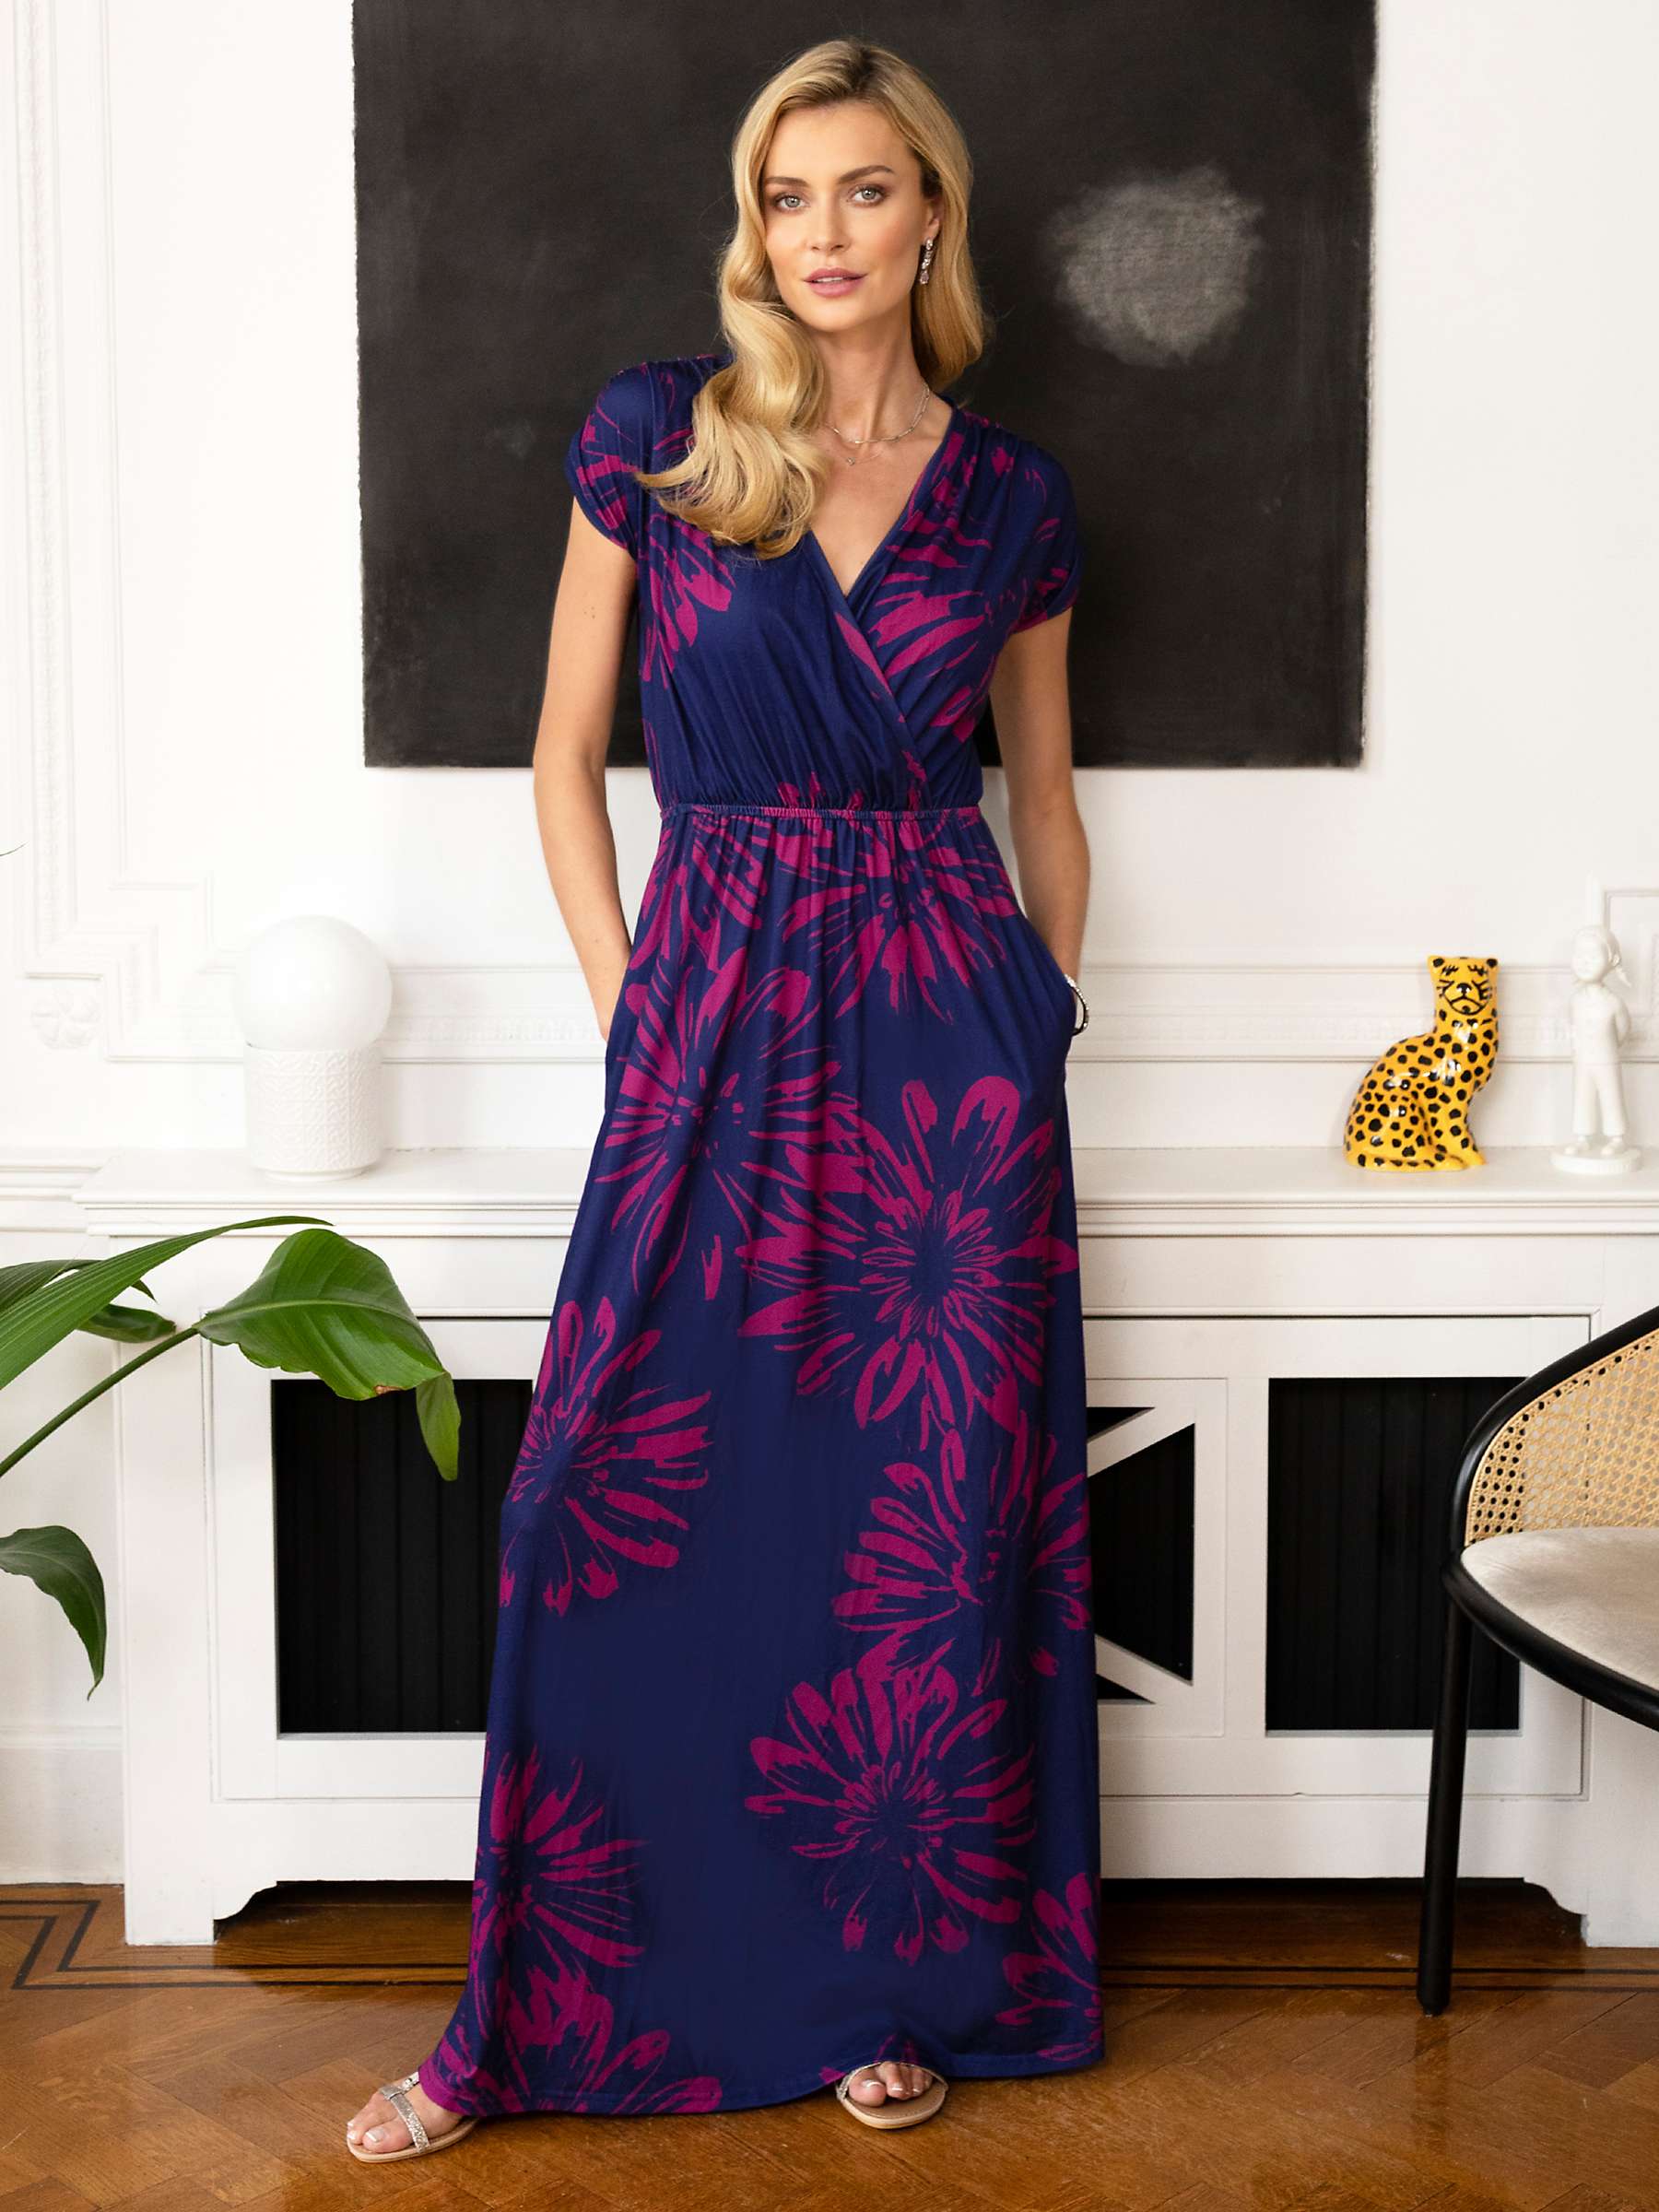 Buy HotSquash Iconic Floral Maxi Dress, Navy/Pink Online at johnlewis.com